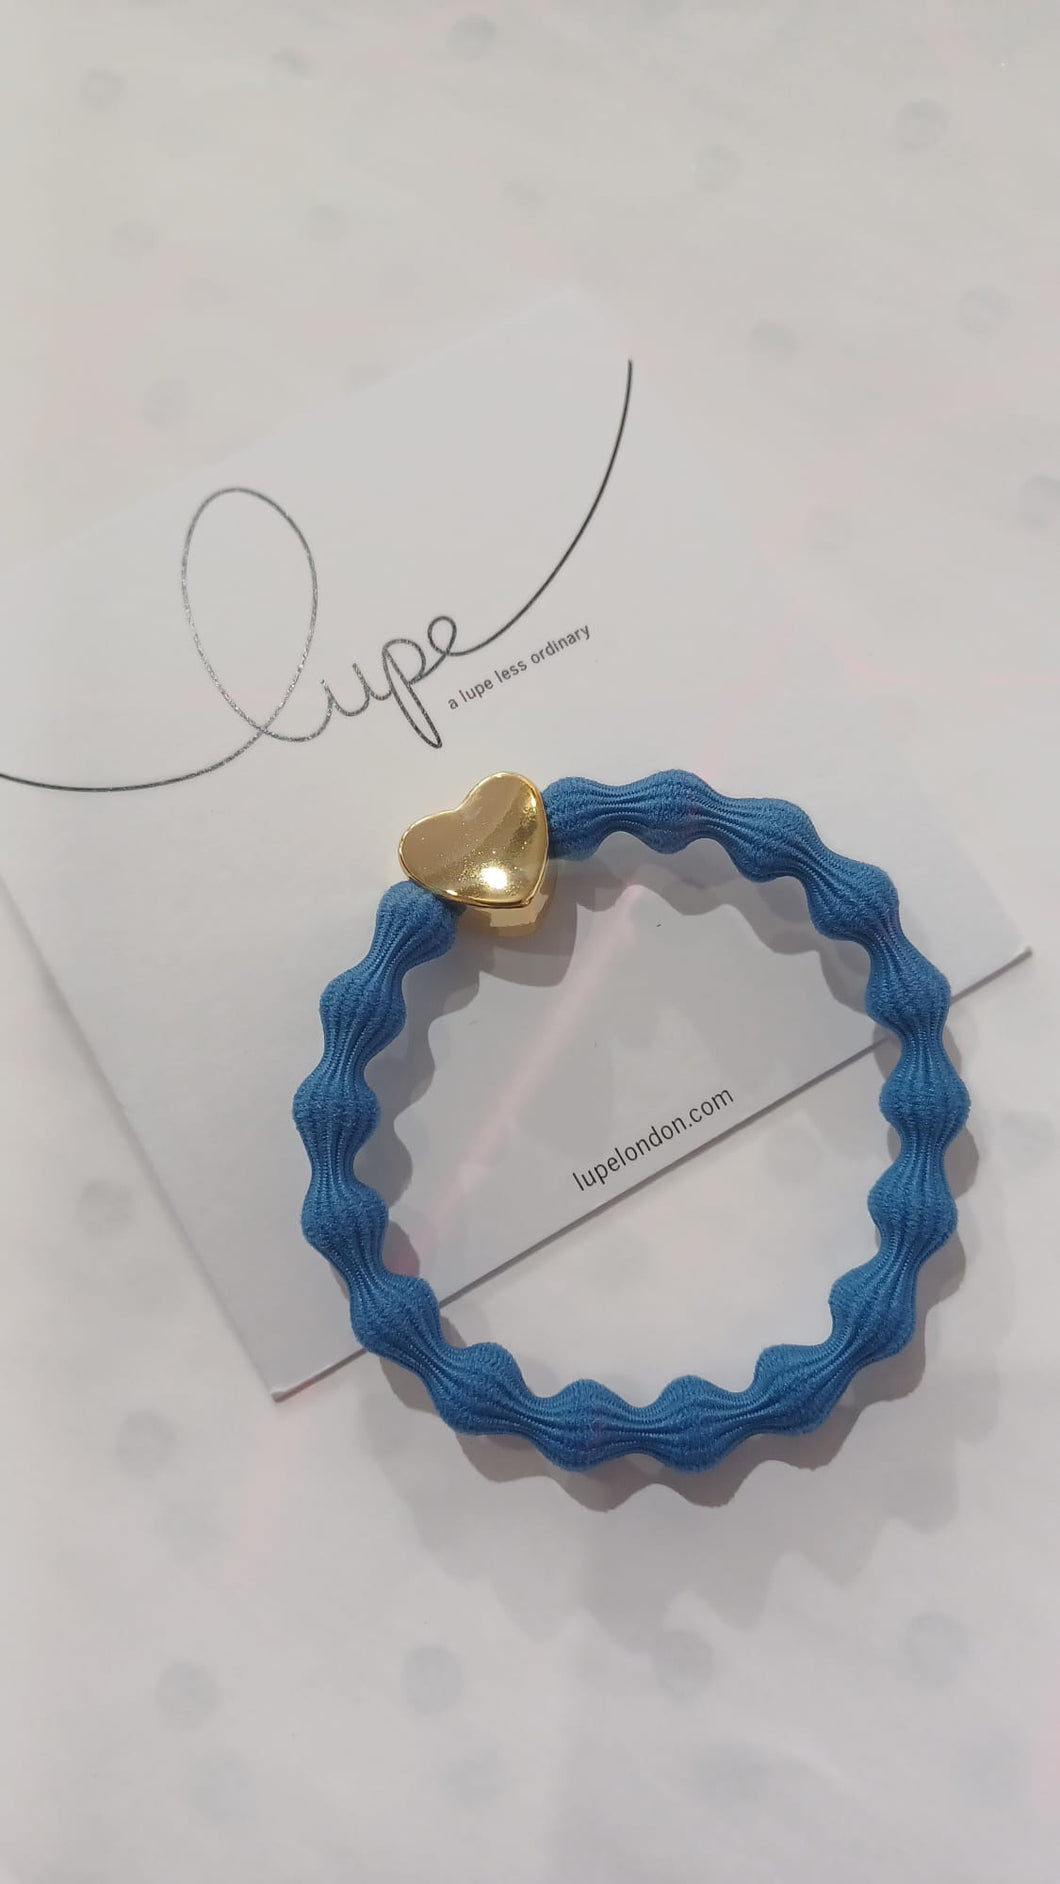 Lupe Hair Tie and Bracelet Gold Heart